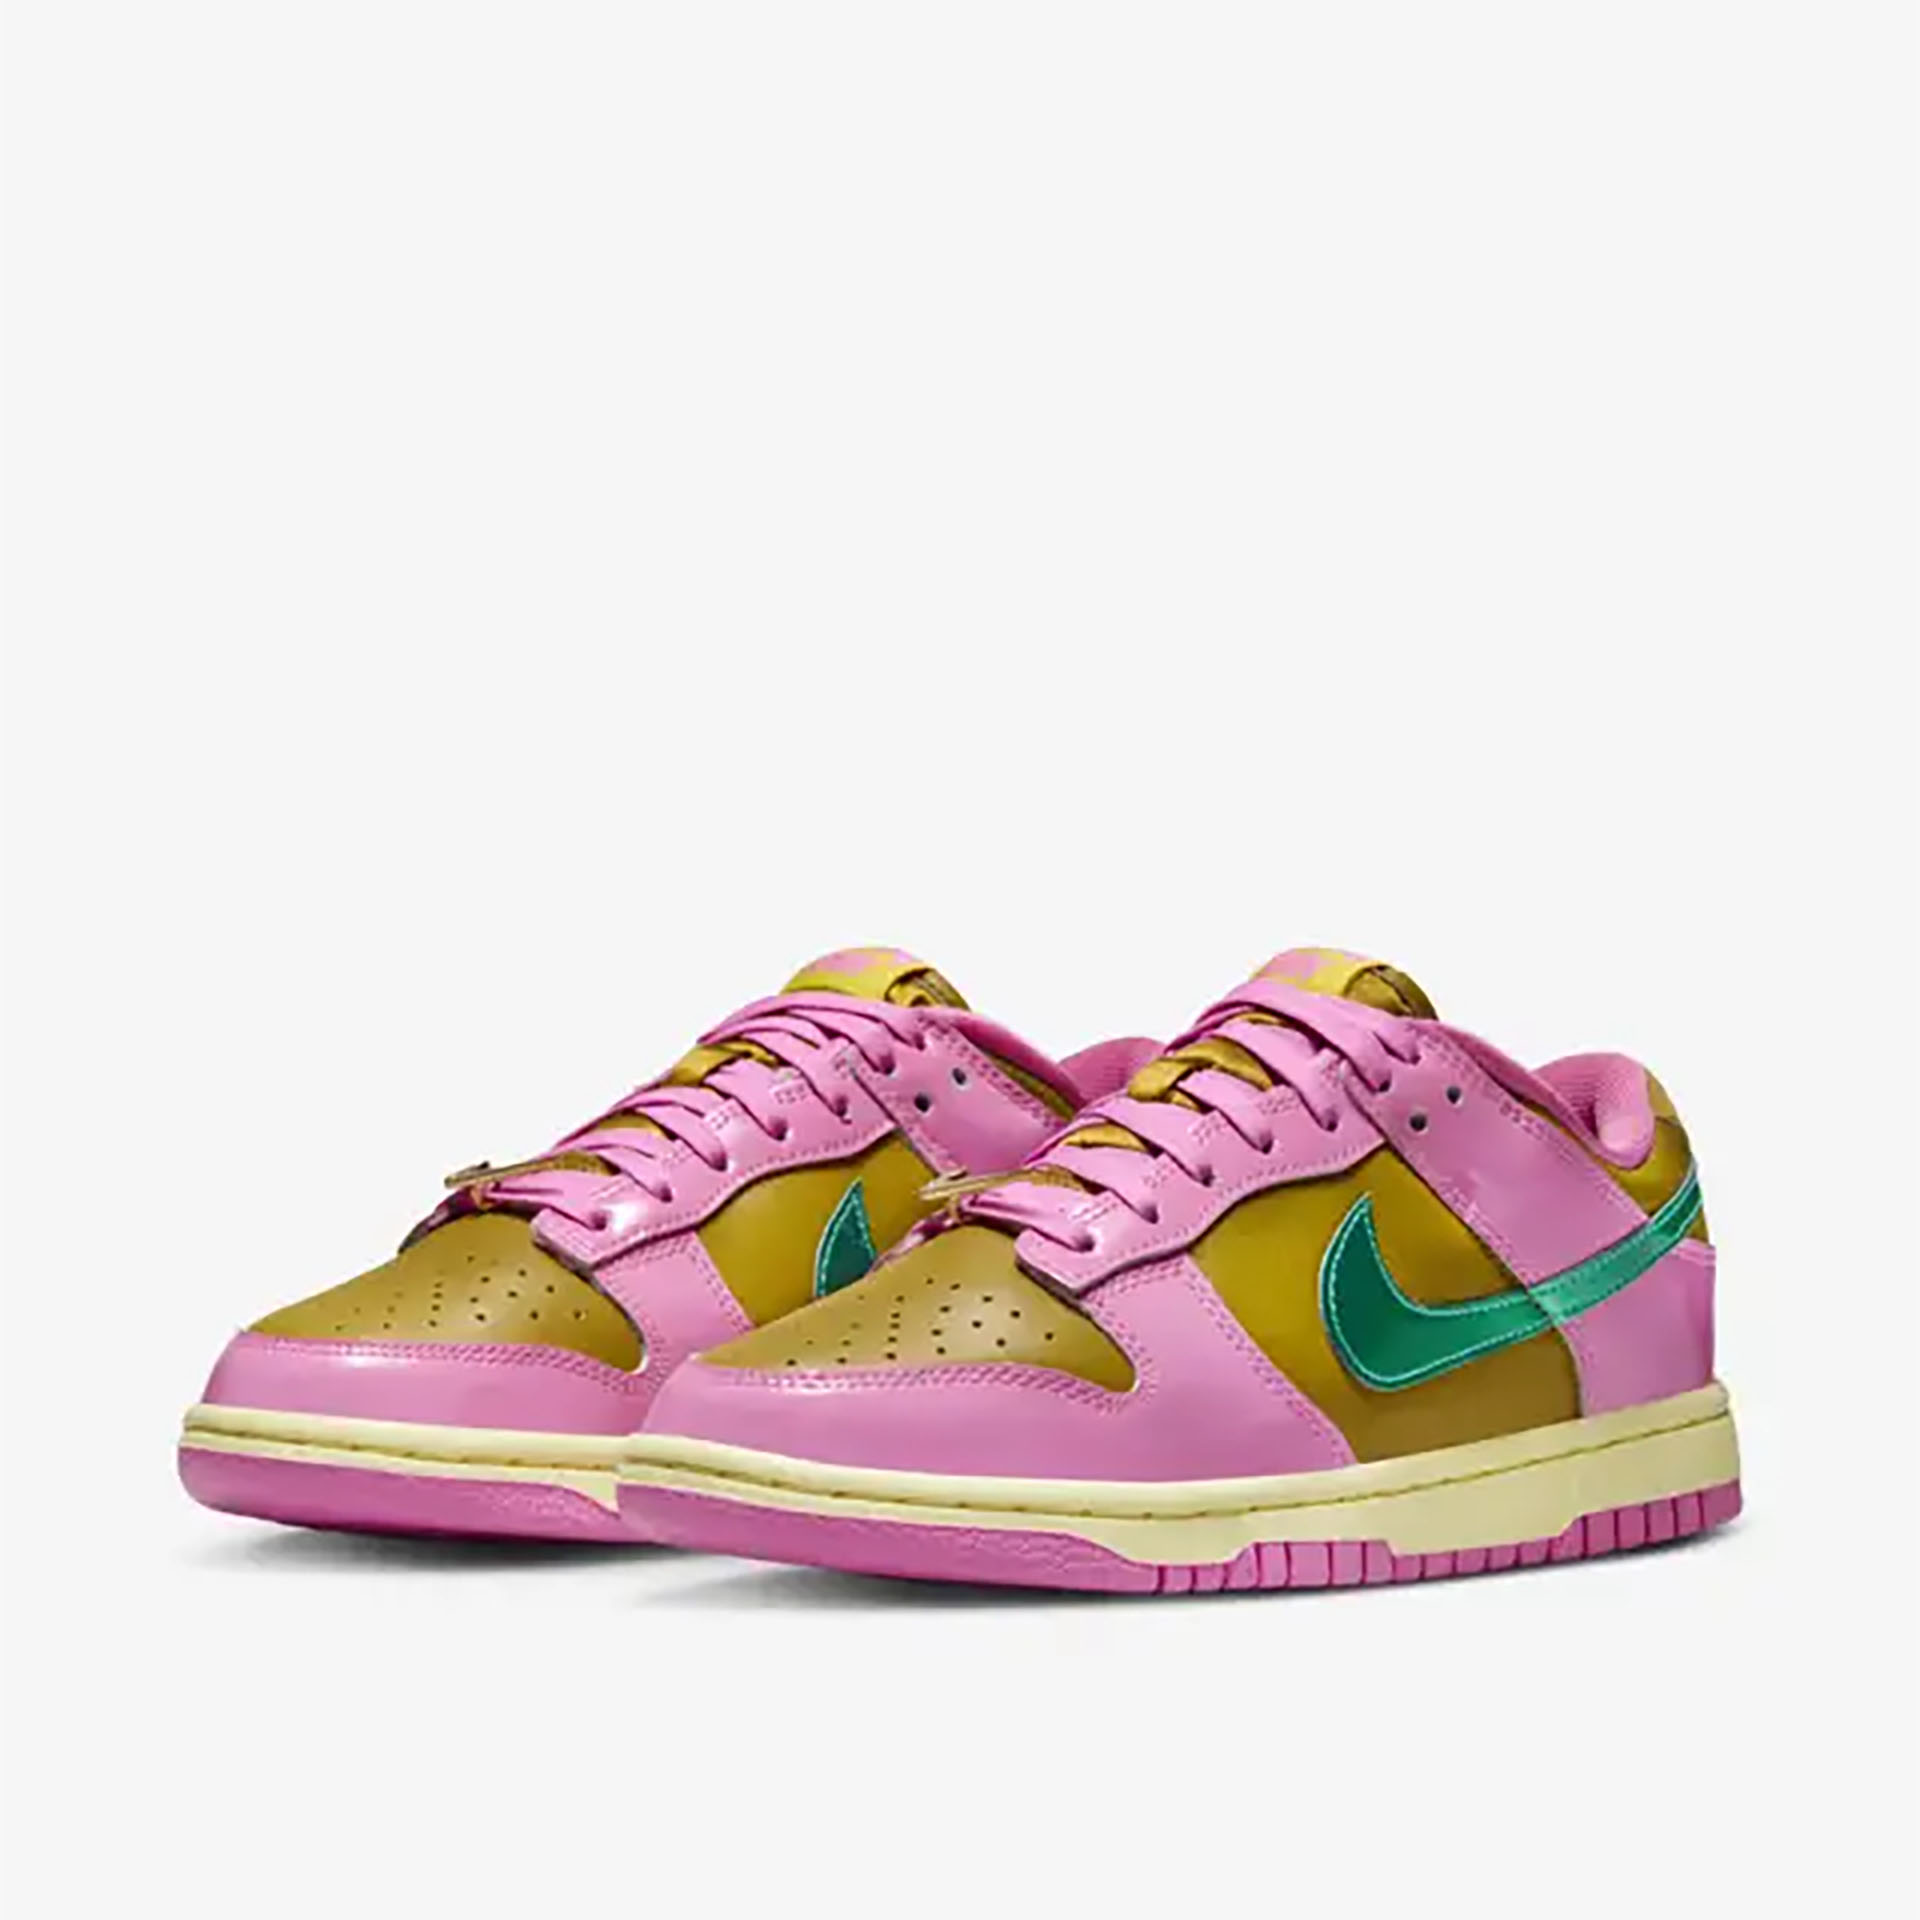 WOMEN'S DUNK LOW by Parris Goebel 'Playful Pink' ｜ FLY BASKETBALL